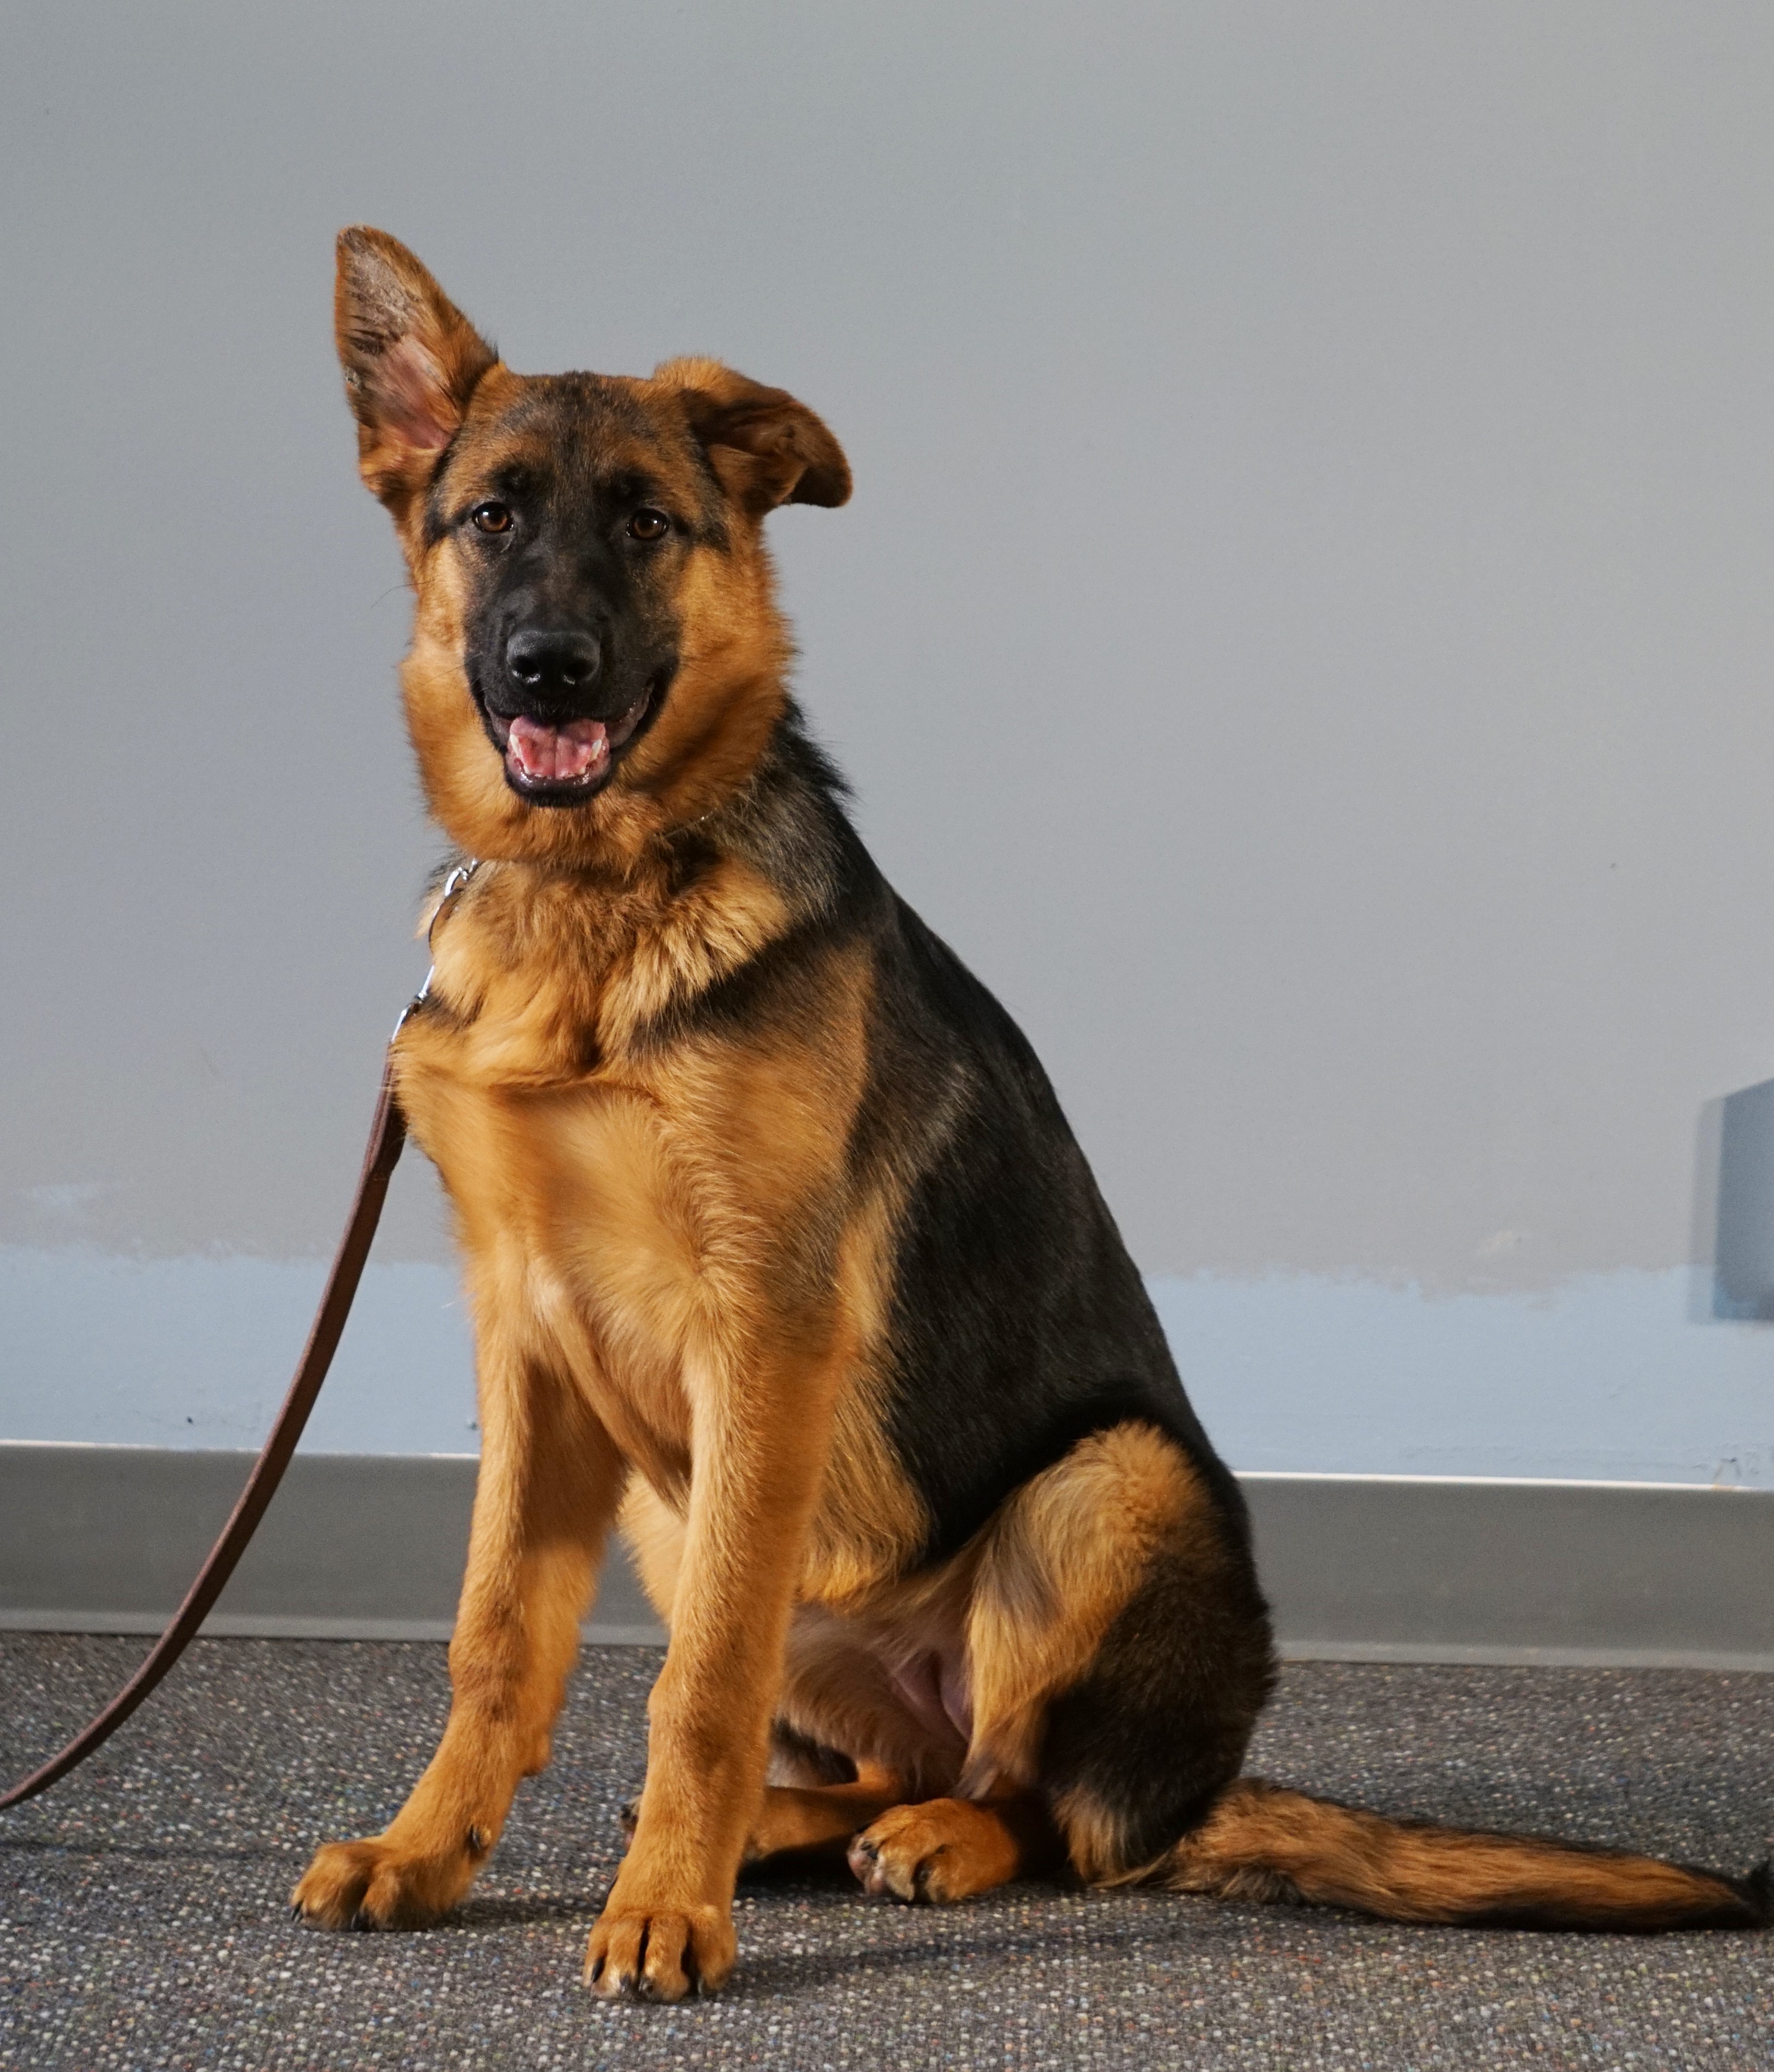 Training german shepherd rescue – Dogs in our life photo blog